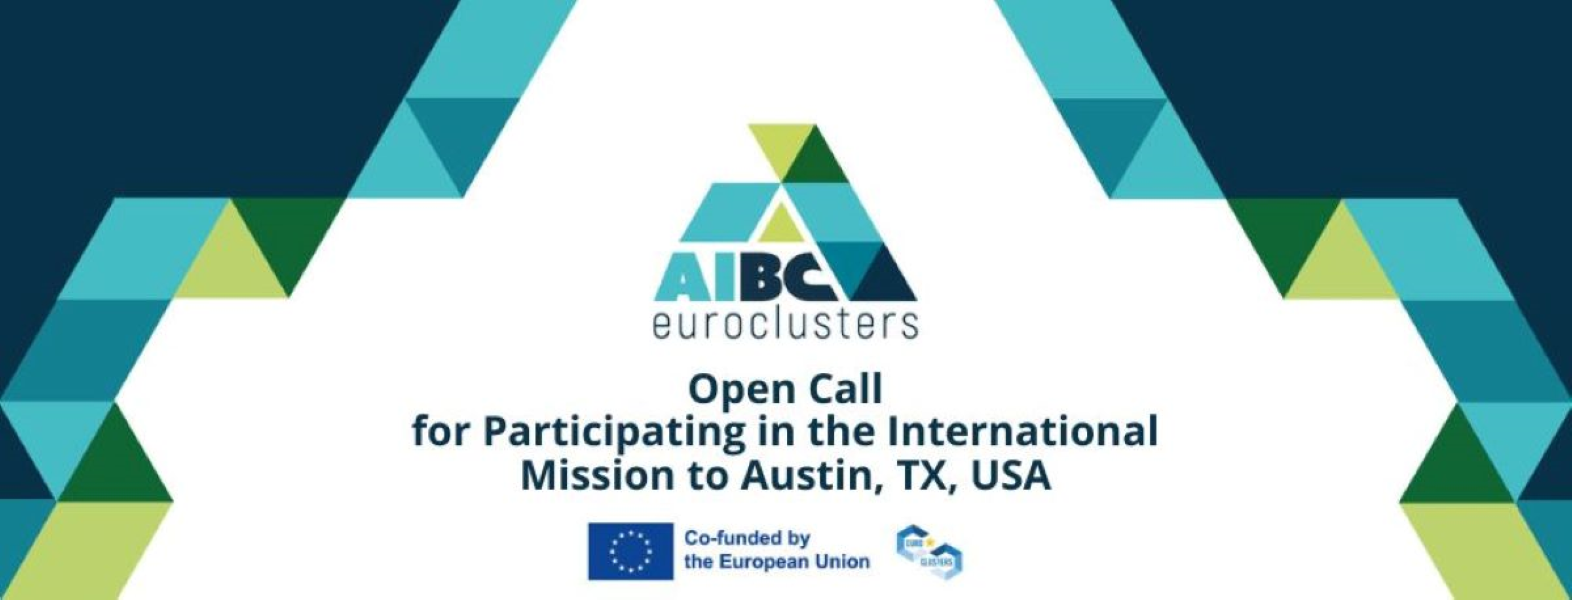 AIBC-EUROCLUSTERS-Open-Call-for-Participating-in-the-International-Mission-to-Austin-TX-USA3